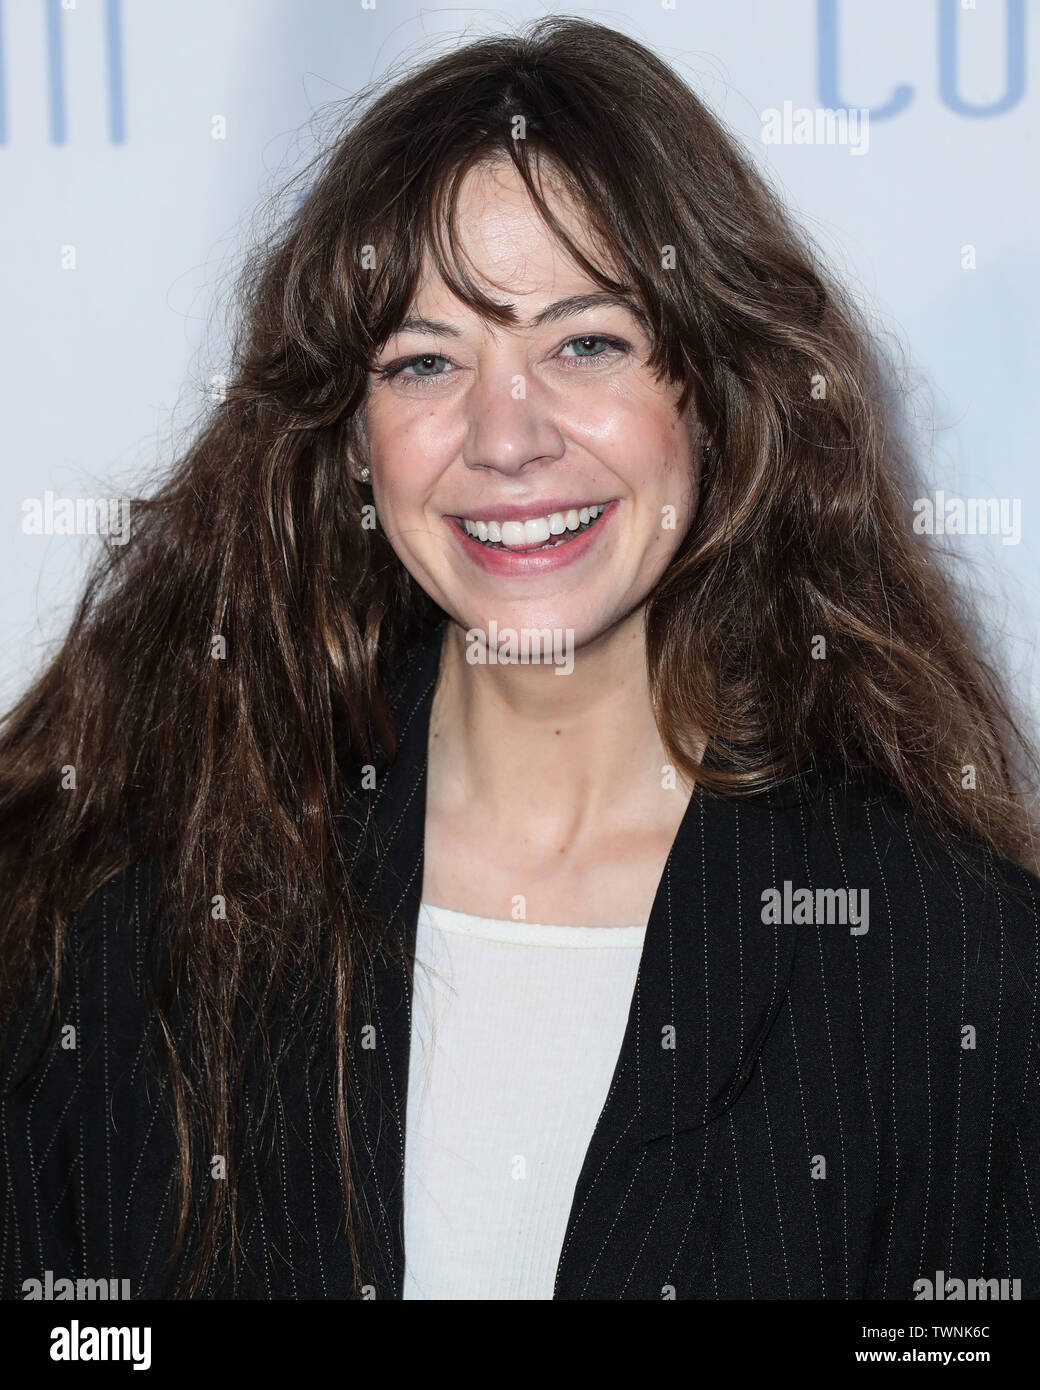 Los Angeles, United States. 21st June, 2019. LOS ANGELES, CALIFORNIA, USA - JUNE 21: Actress Analeigh Tipton arrives at the 2019 Rom Com Fest Los Angeles - 'Summer Night' held at Downtown Independent on June 21, 2019 in Los Angeles, California, United States. (Photo by Xavier Collin/Image Press Agency) Credit: Image Press Agency/Alamy Live News Stock Photo